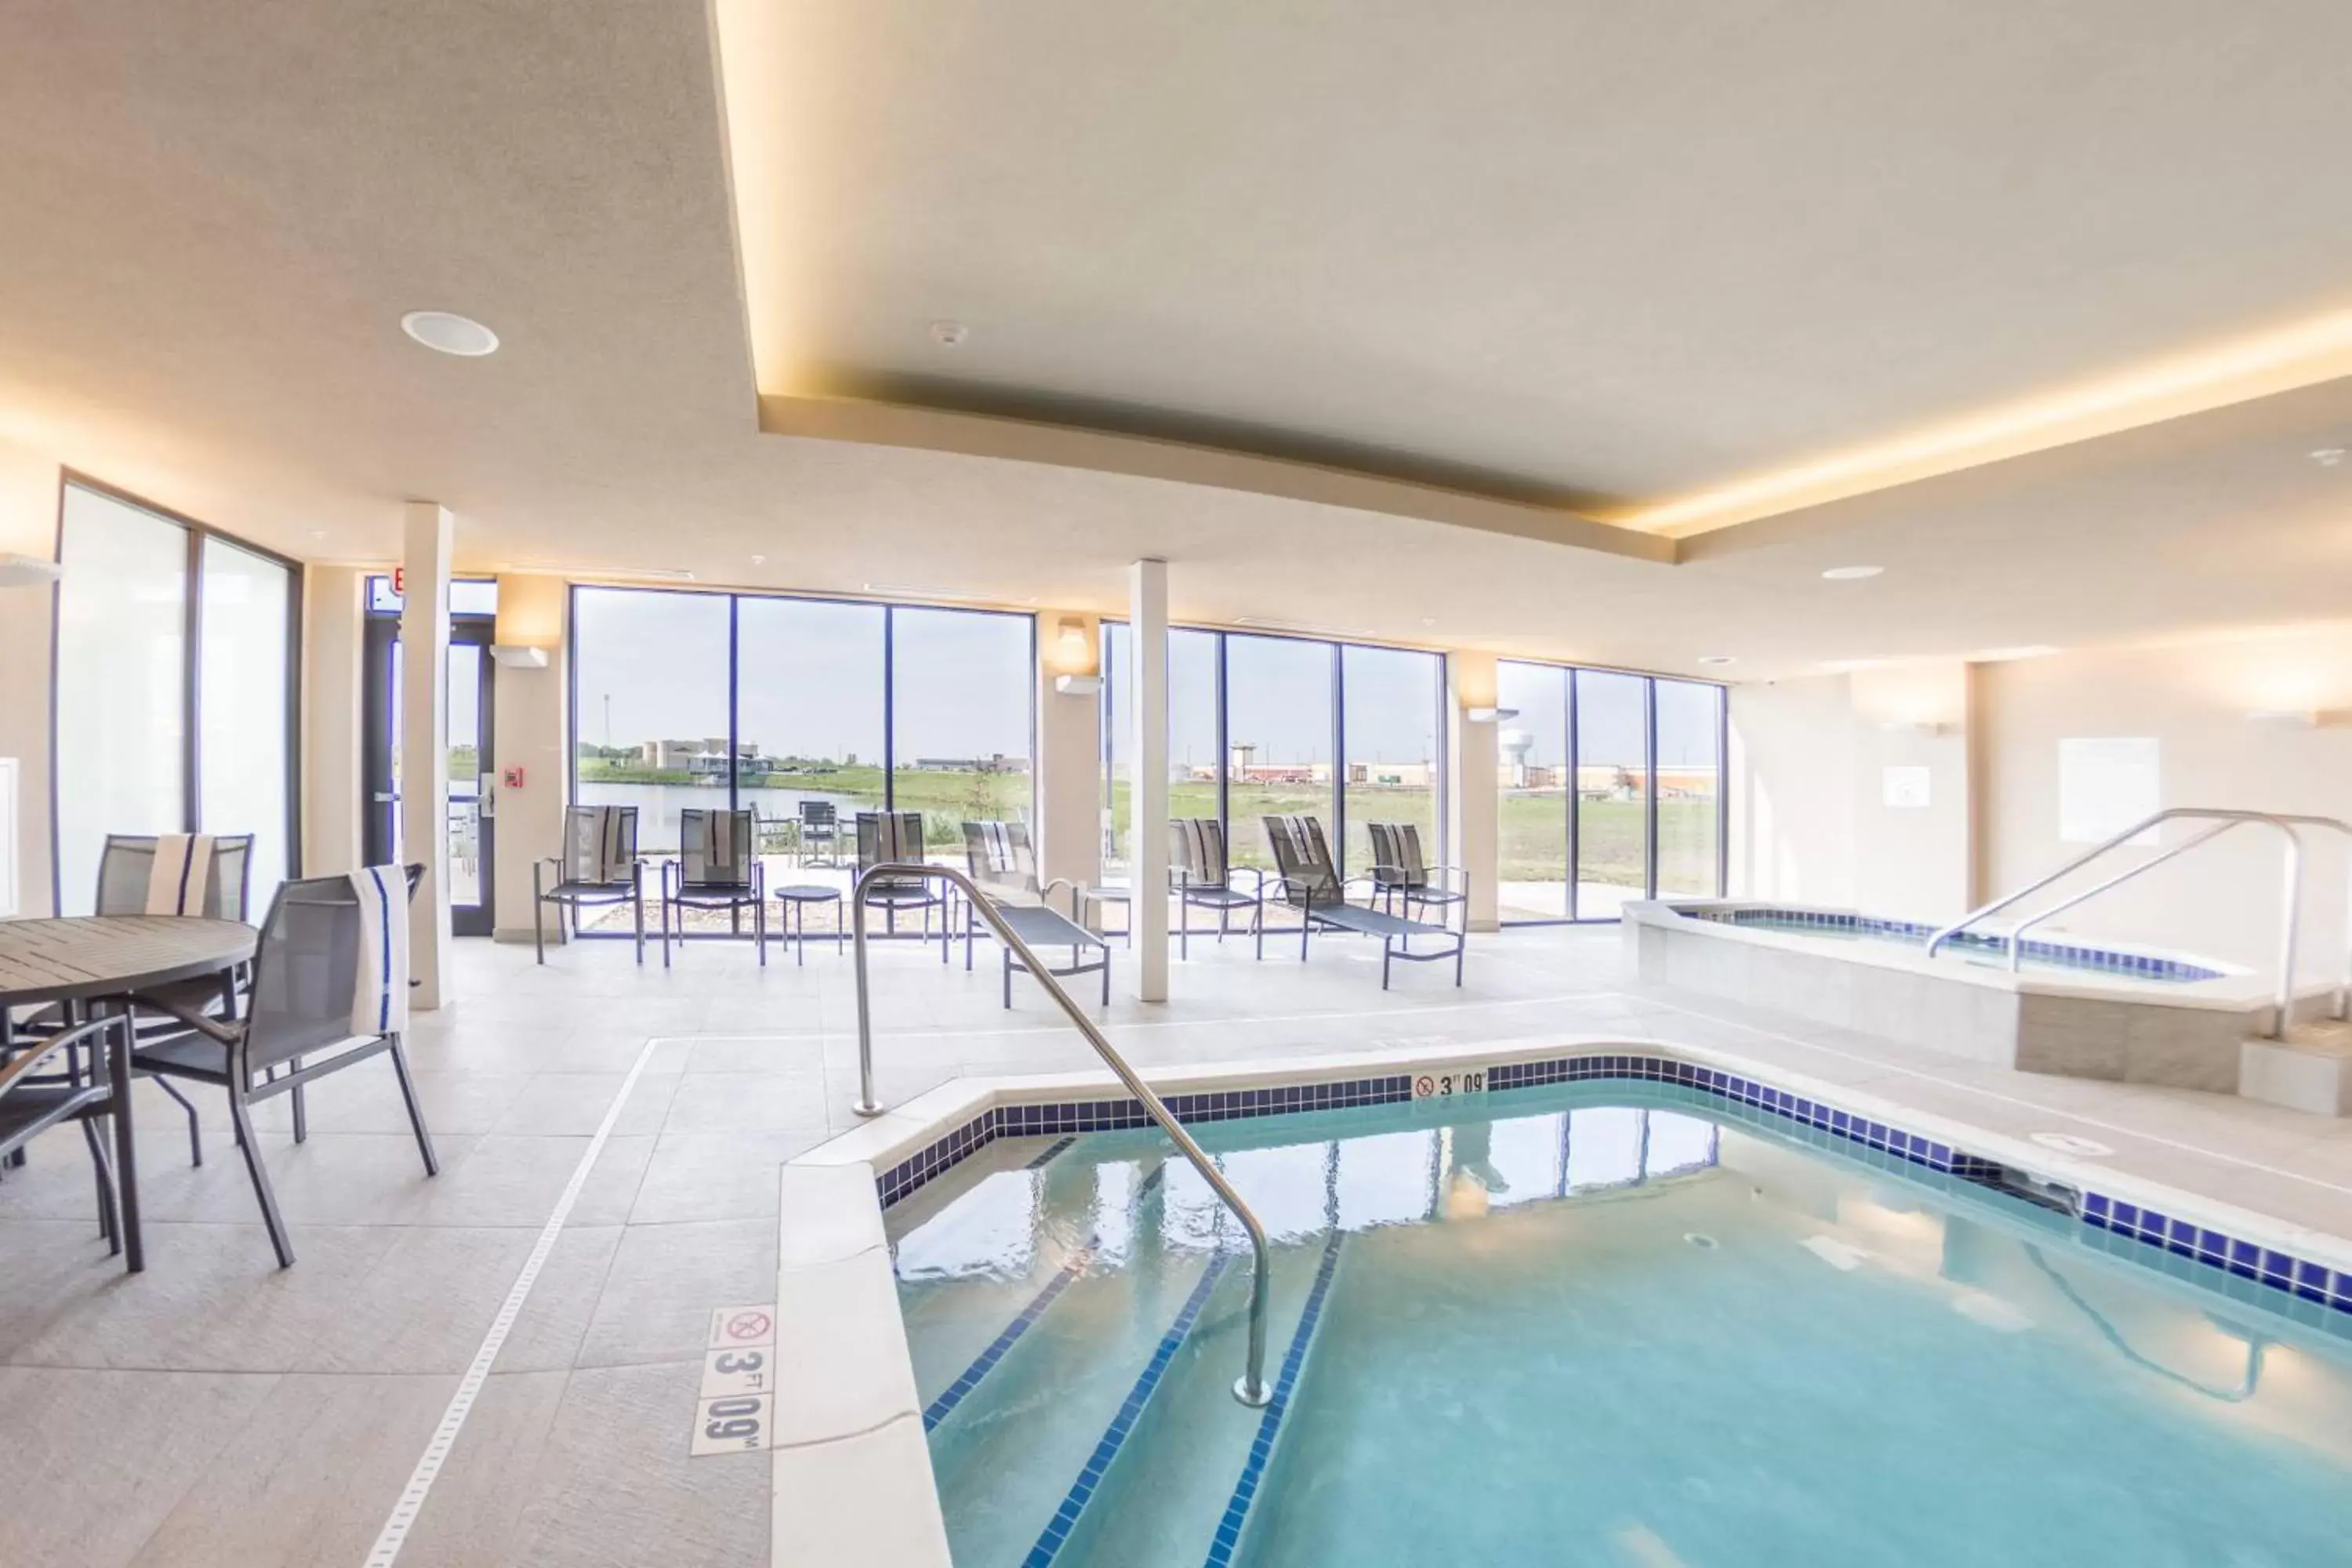 Swimming Pool in Fairfield Inn & Suites by Marriott Des Moines Altoona